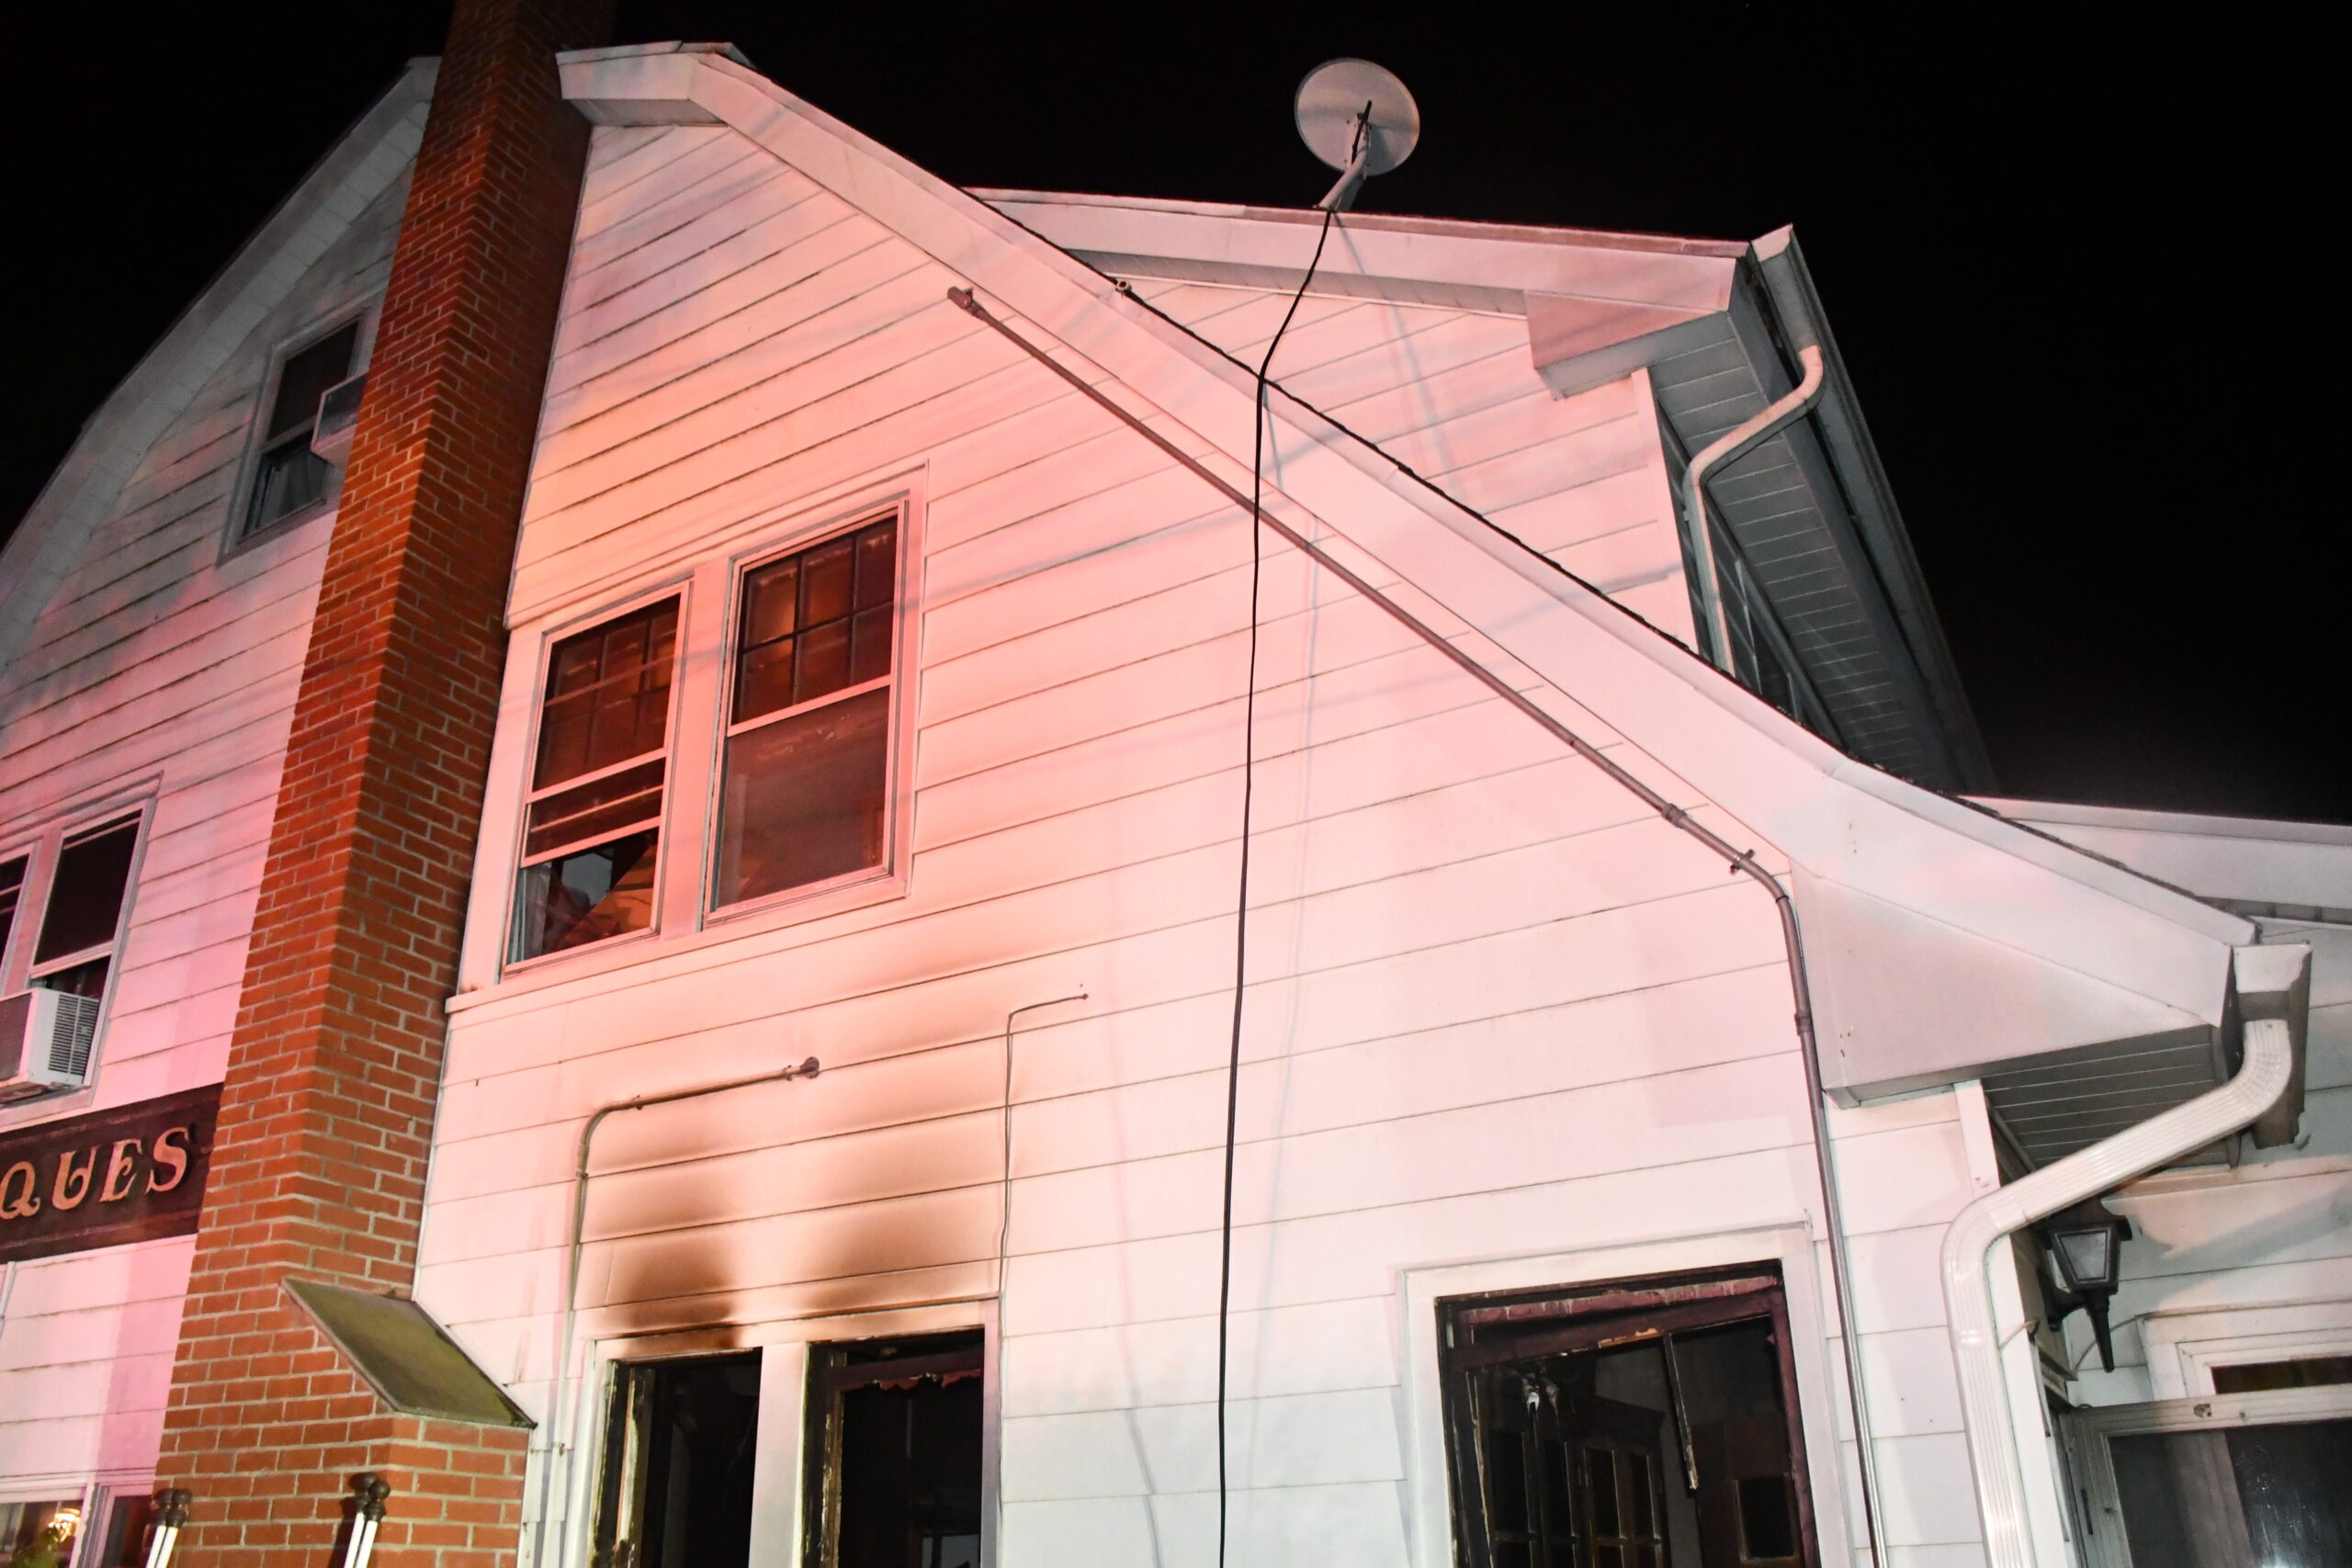 A smoke fire in a studio apartment off Montauk Highway Sunday night claimed the life of its resident. COURTESY SOUTHAMPTON TOWN POLICE